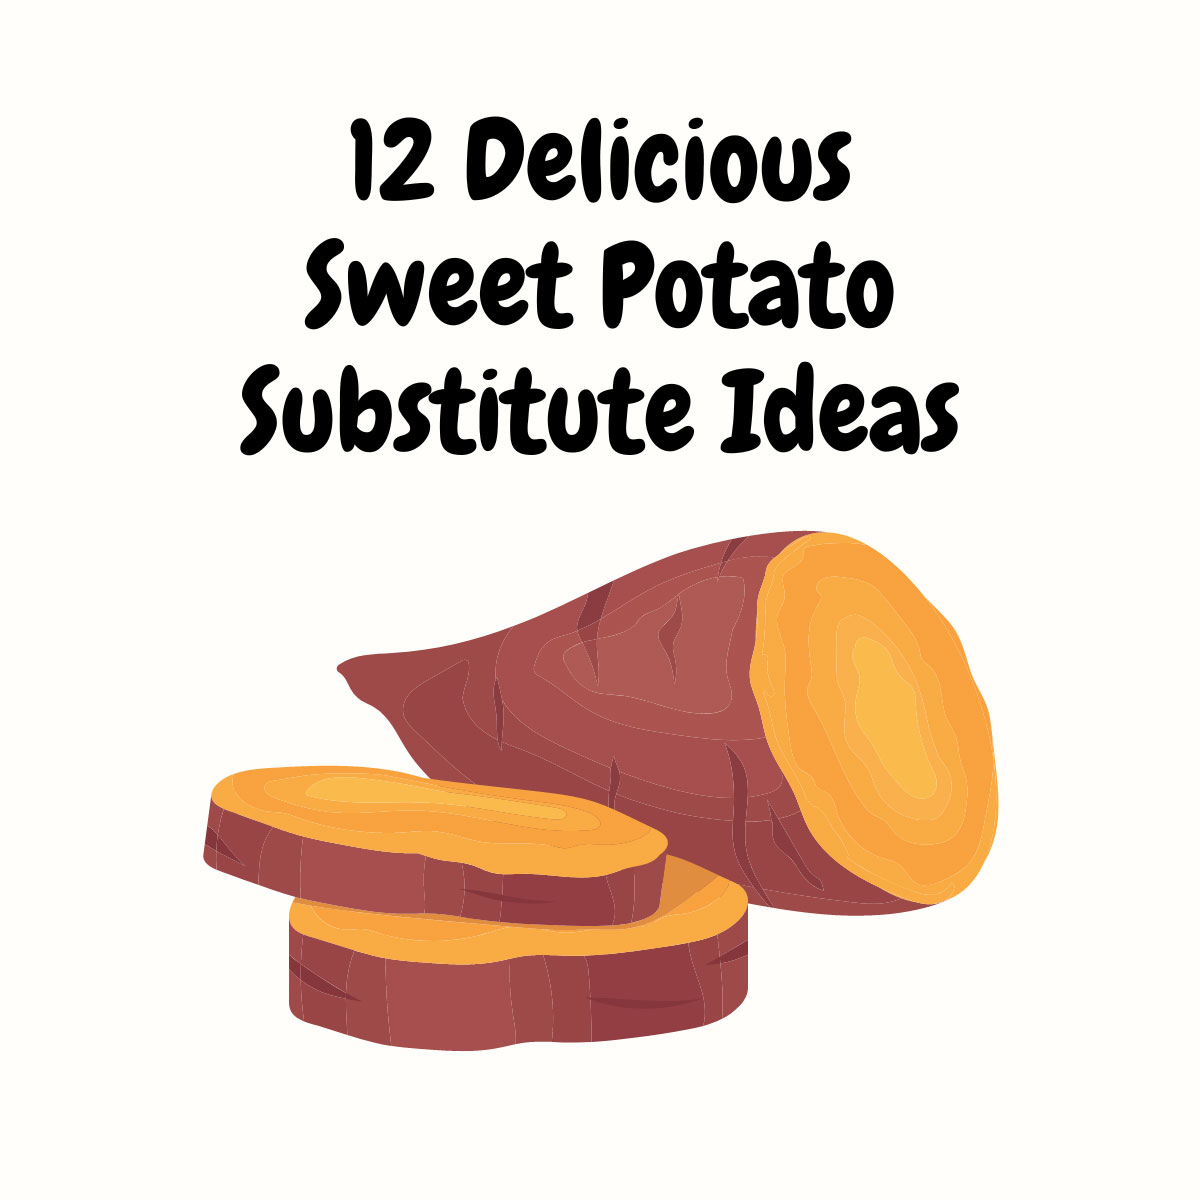 12 Delicious Sweet Potato Substitute Ideas featured image | Girl Meets Food